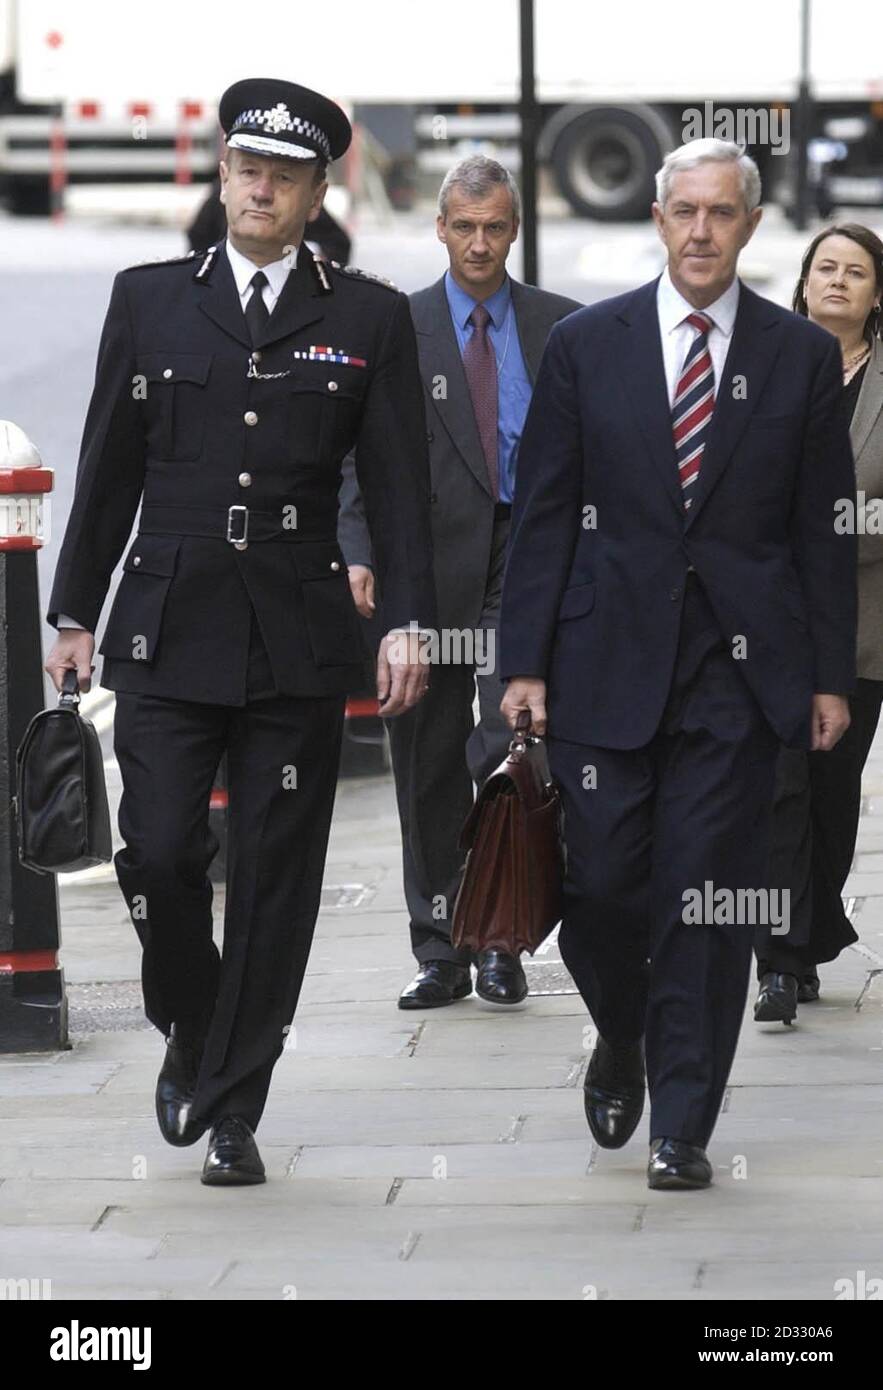 Metropolitan Police Commissioner Sir John Stevens (left) and his predecessor Lord Condon arriving at the Old Bailey in London, where they are due to stand trial accused of safety breaches relating to police officers. * They have both pleaded not guilty to five charges brought by the Health and Safety Executive. The prosecution centres on the assessment and management of the risk faced by police officers of falling from or through roofs while assisting in the apprehension of suspects. 26/04/04: Sir John Stevens is retracing the final route of Diana, Princess of Wales. He plans to see for Stock Photo